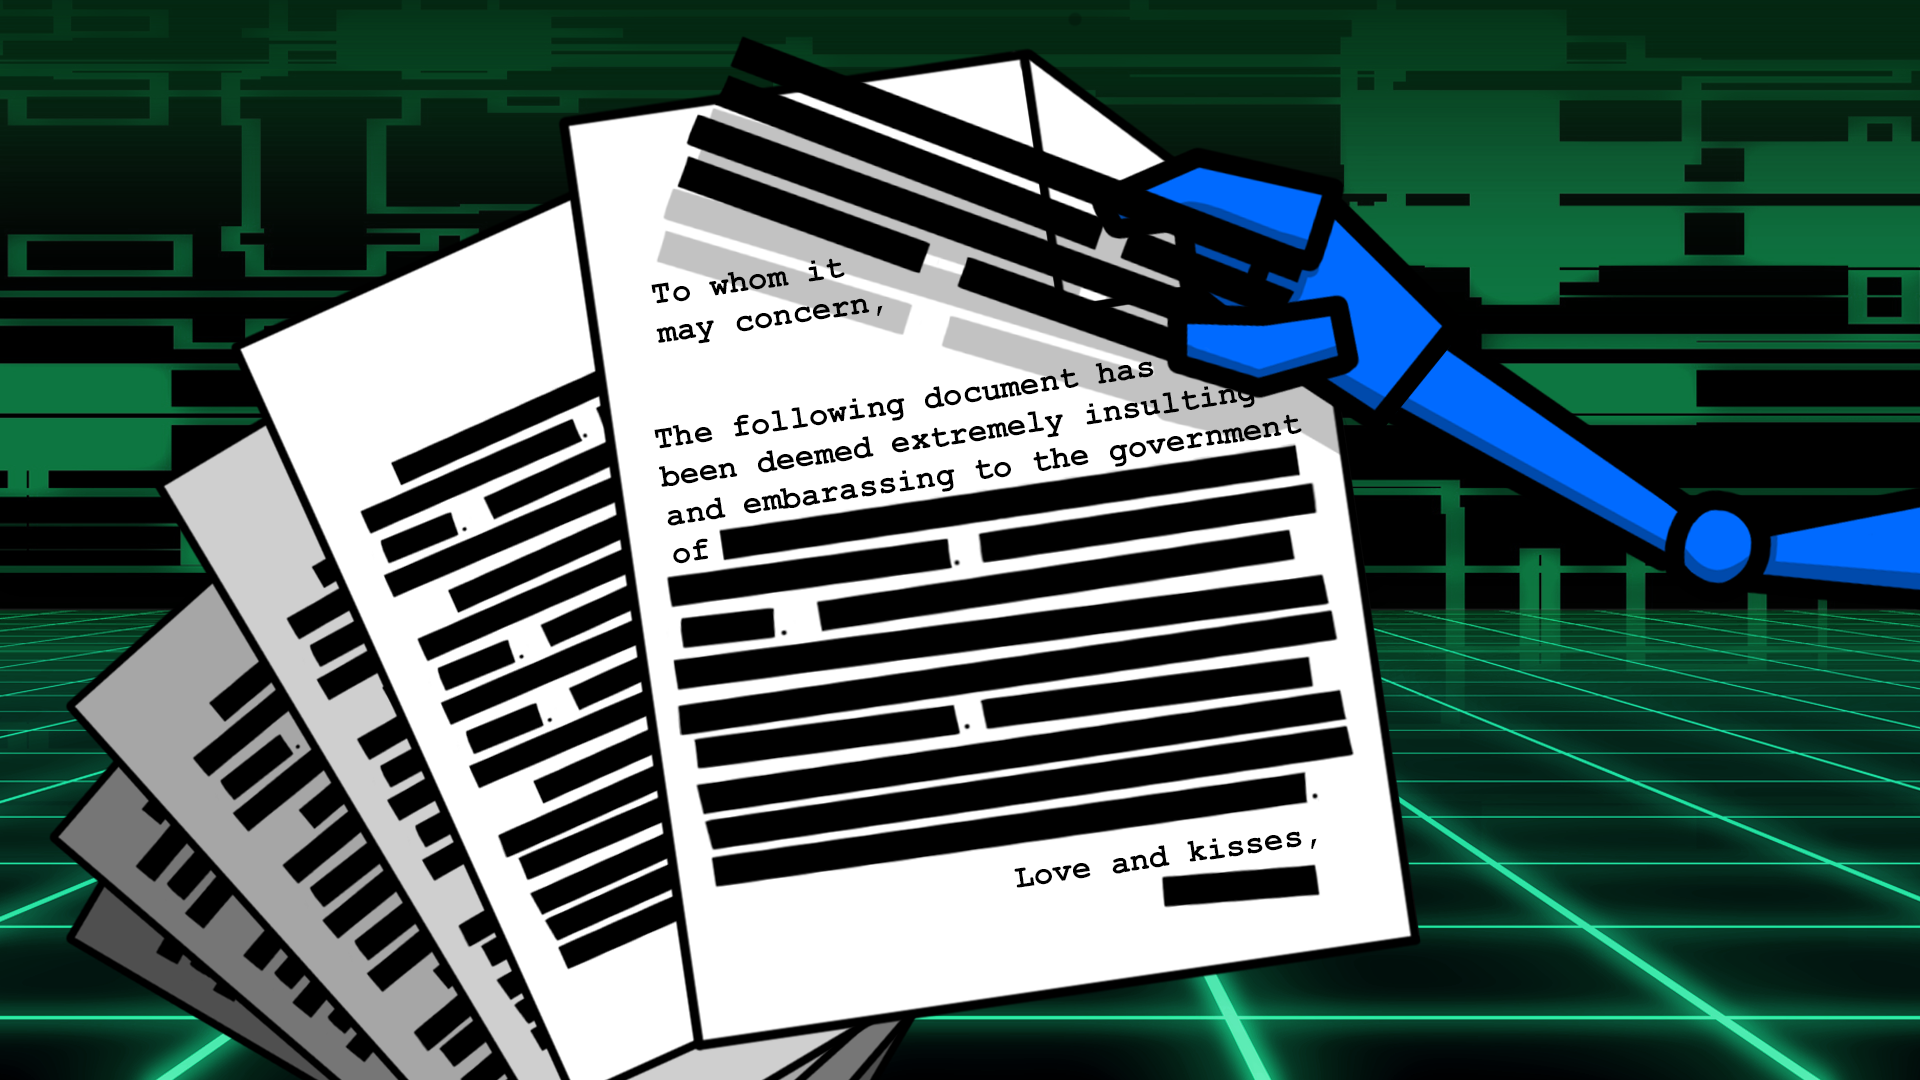 Redacted government forms showing "The following document has been deemed extremely insulting and embarassing to the government of..."